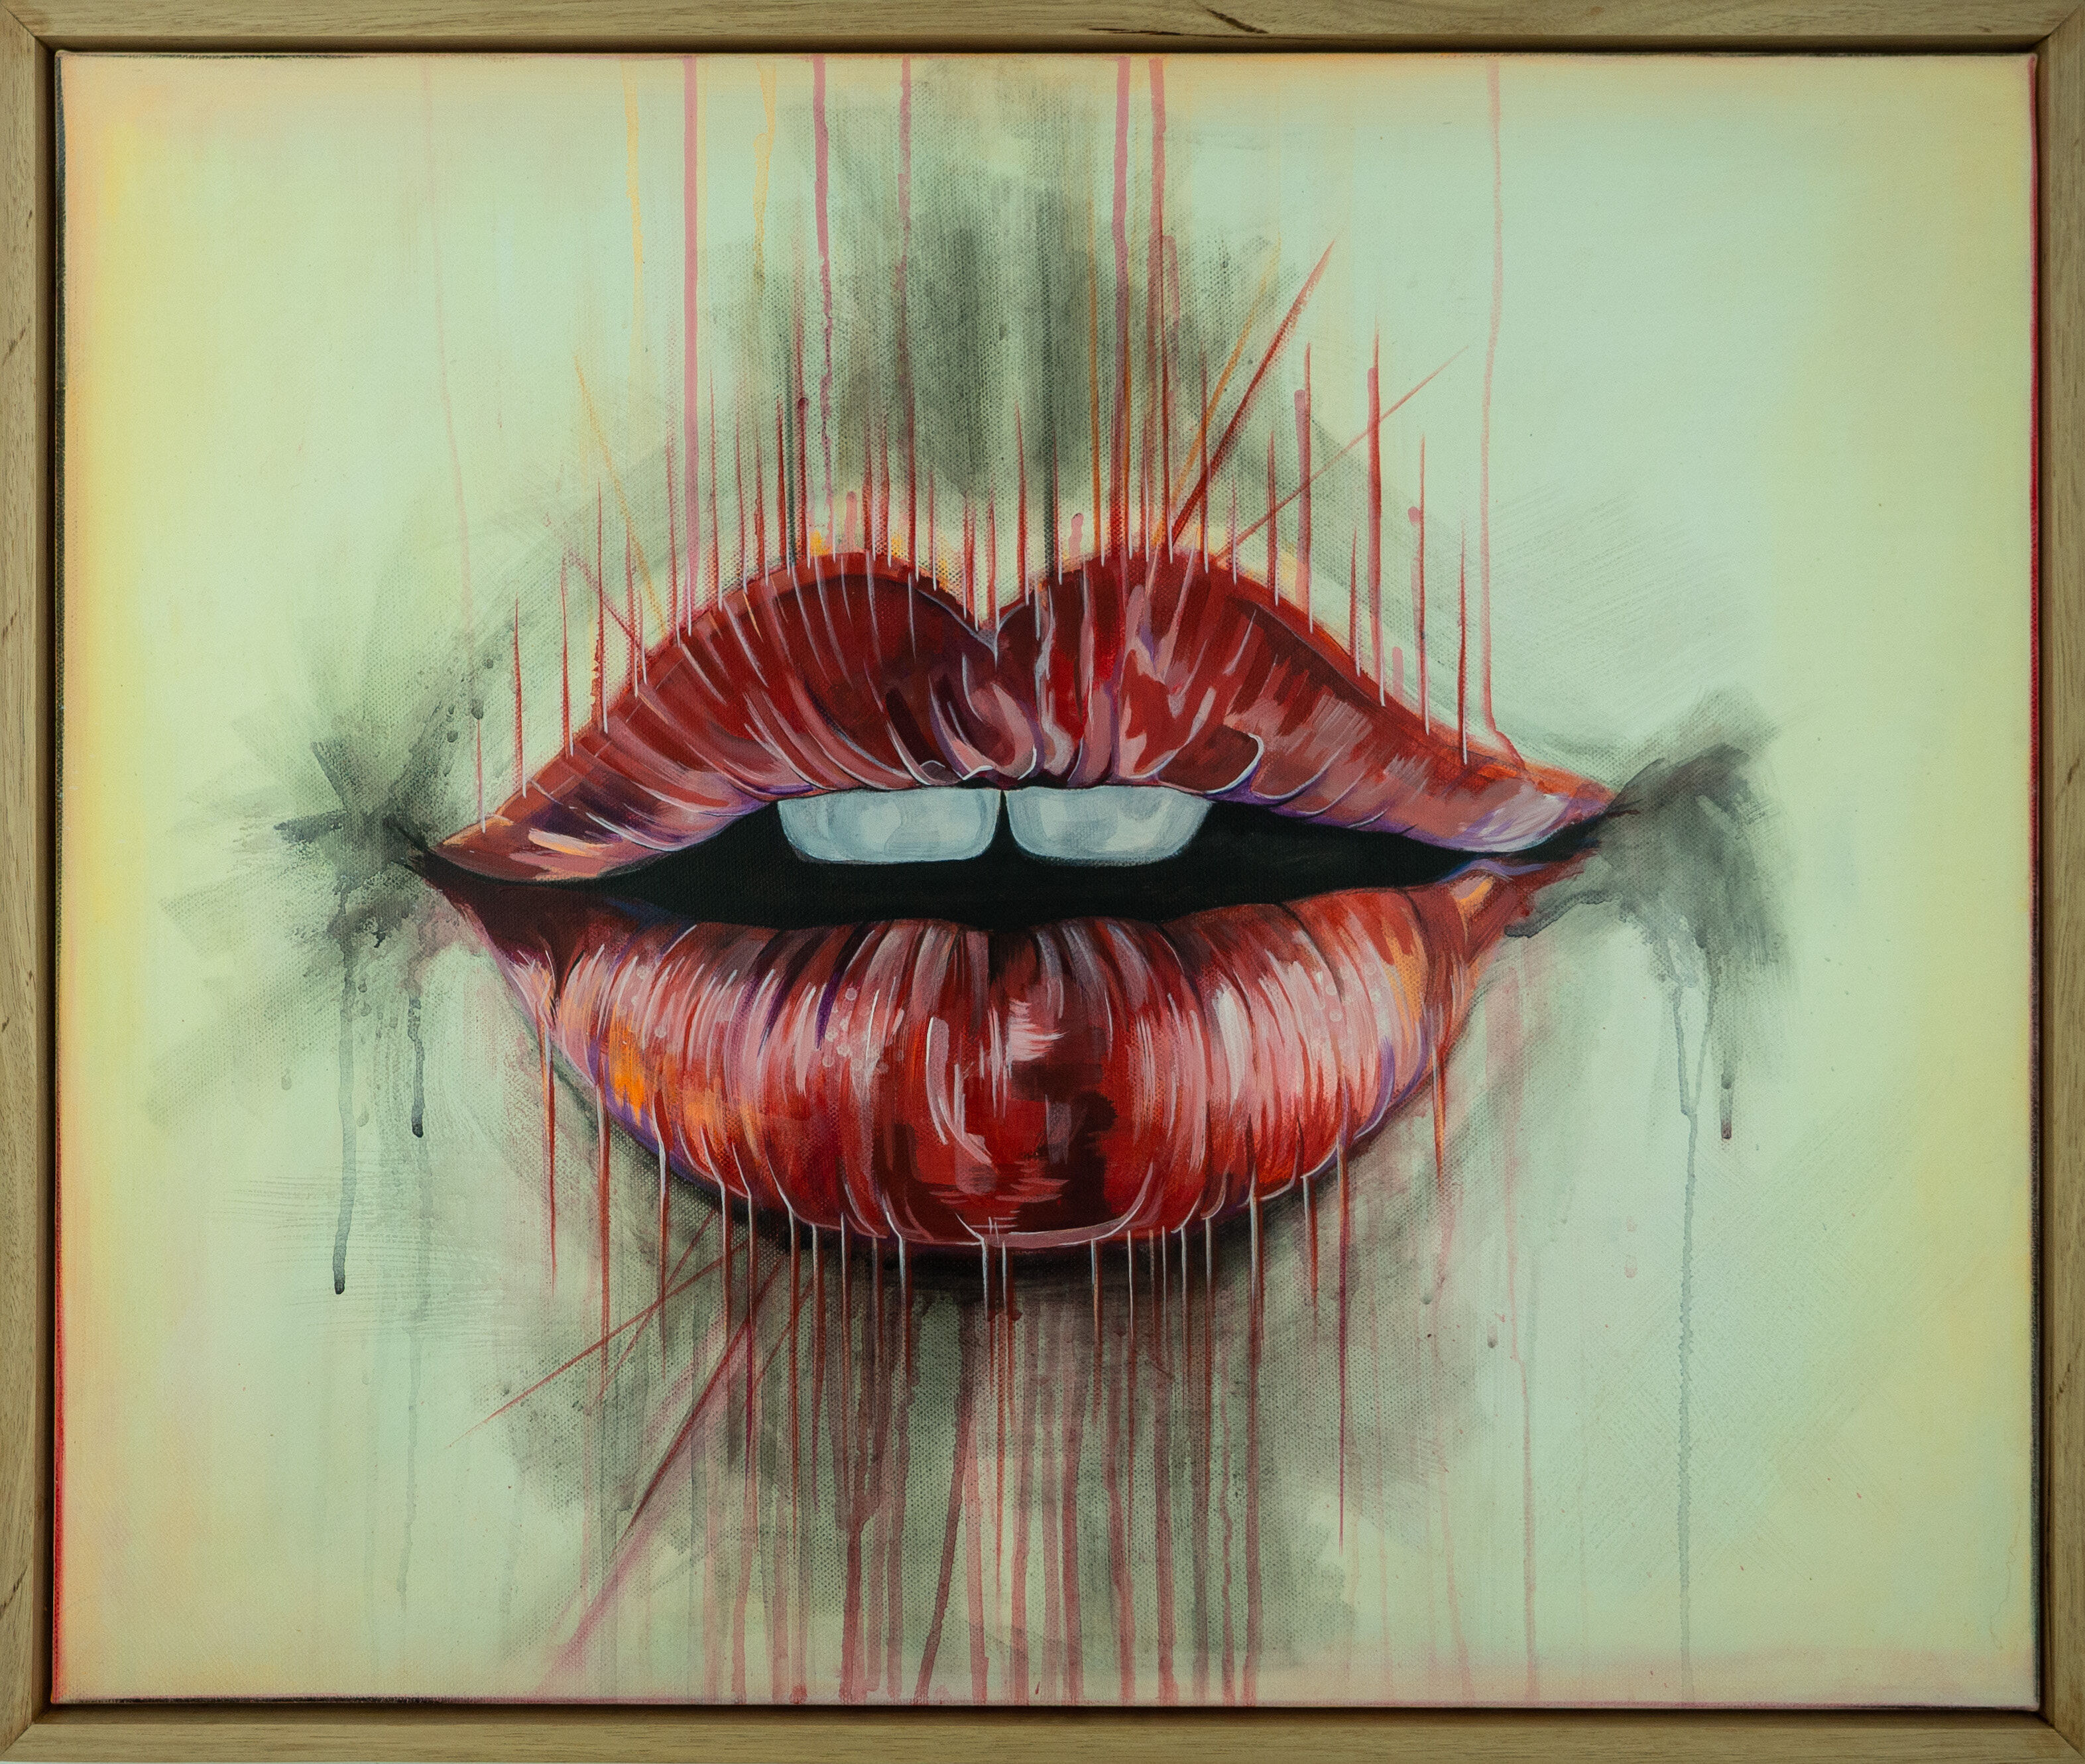 _11.1-Lips-Red-Hot-Sexy-Popculture-Framed